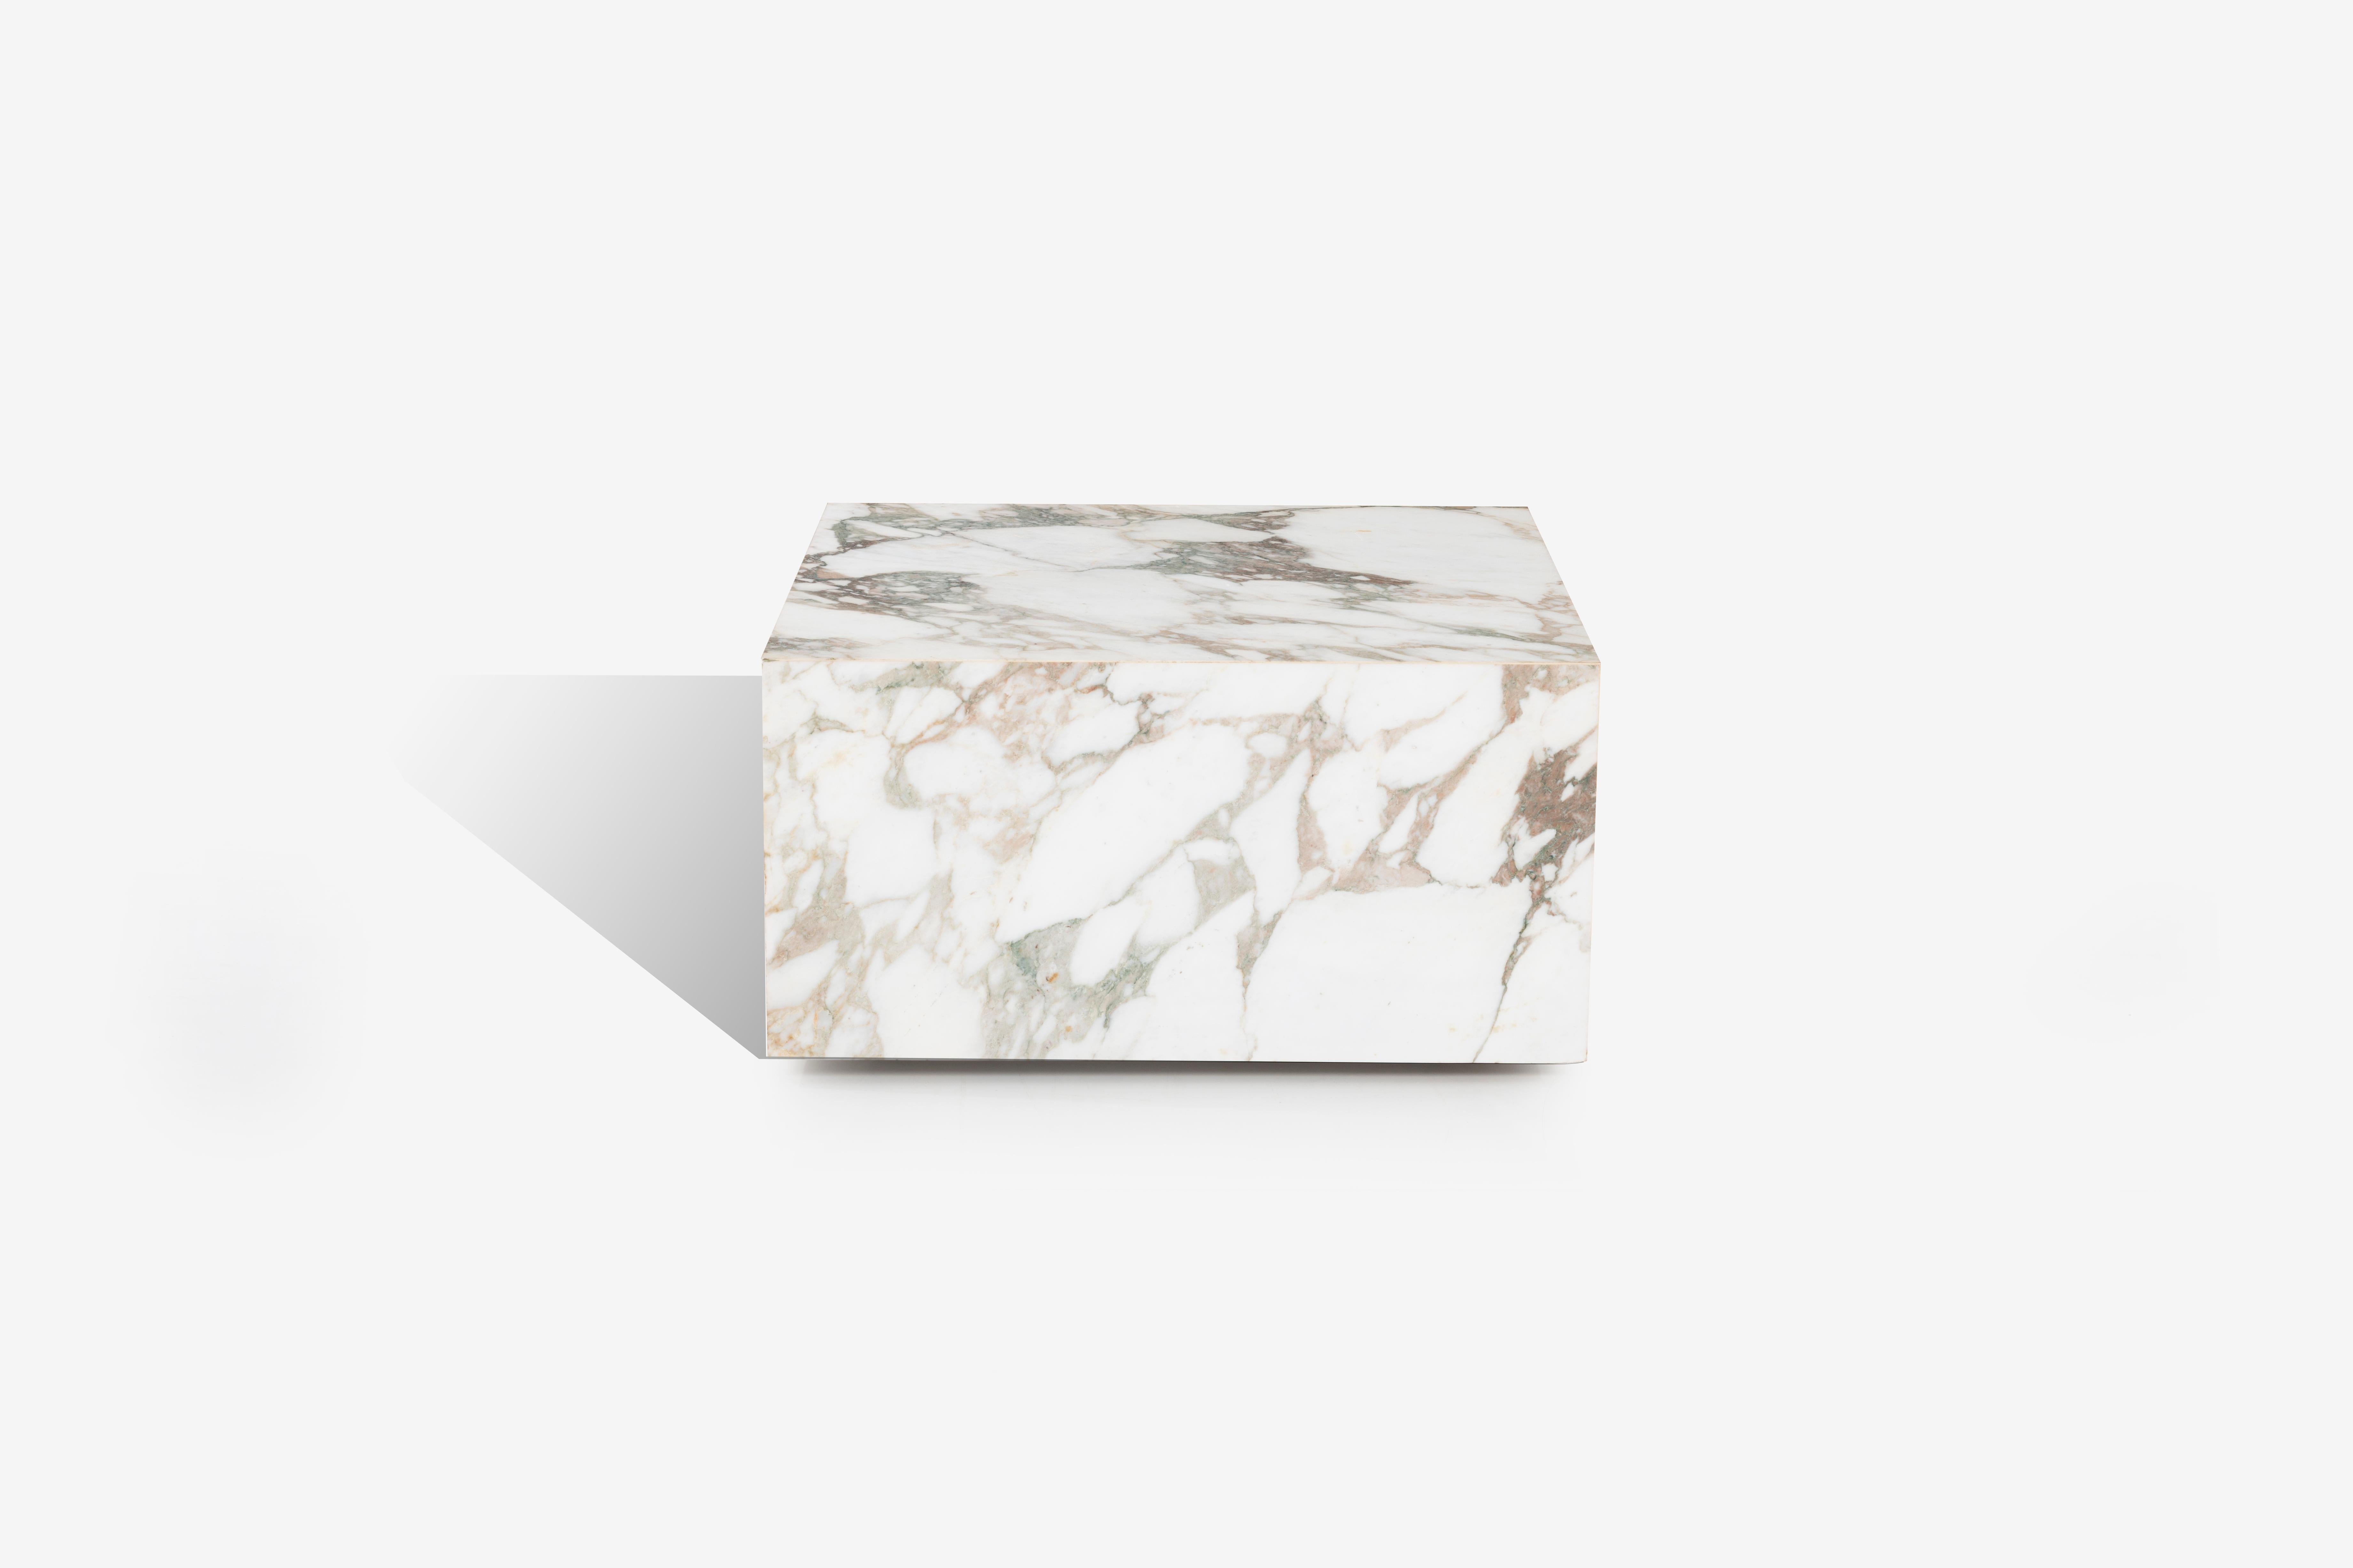 Knoll Gae Aulenti style Calacatta cube coffee table, solid marble cube appearance, constructed with marble supports on underside with hidden wheels for easy placement and clean reveal appliance.